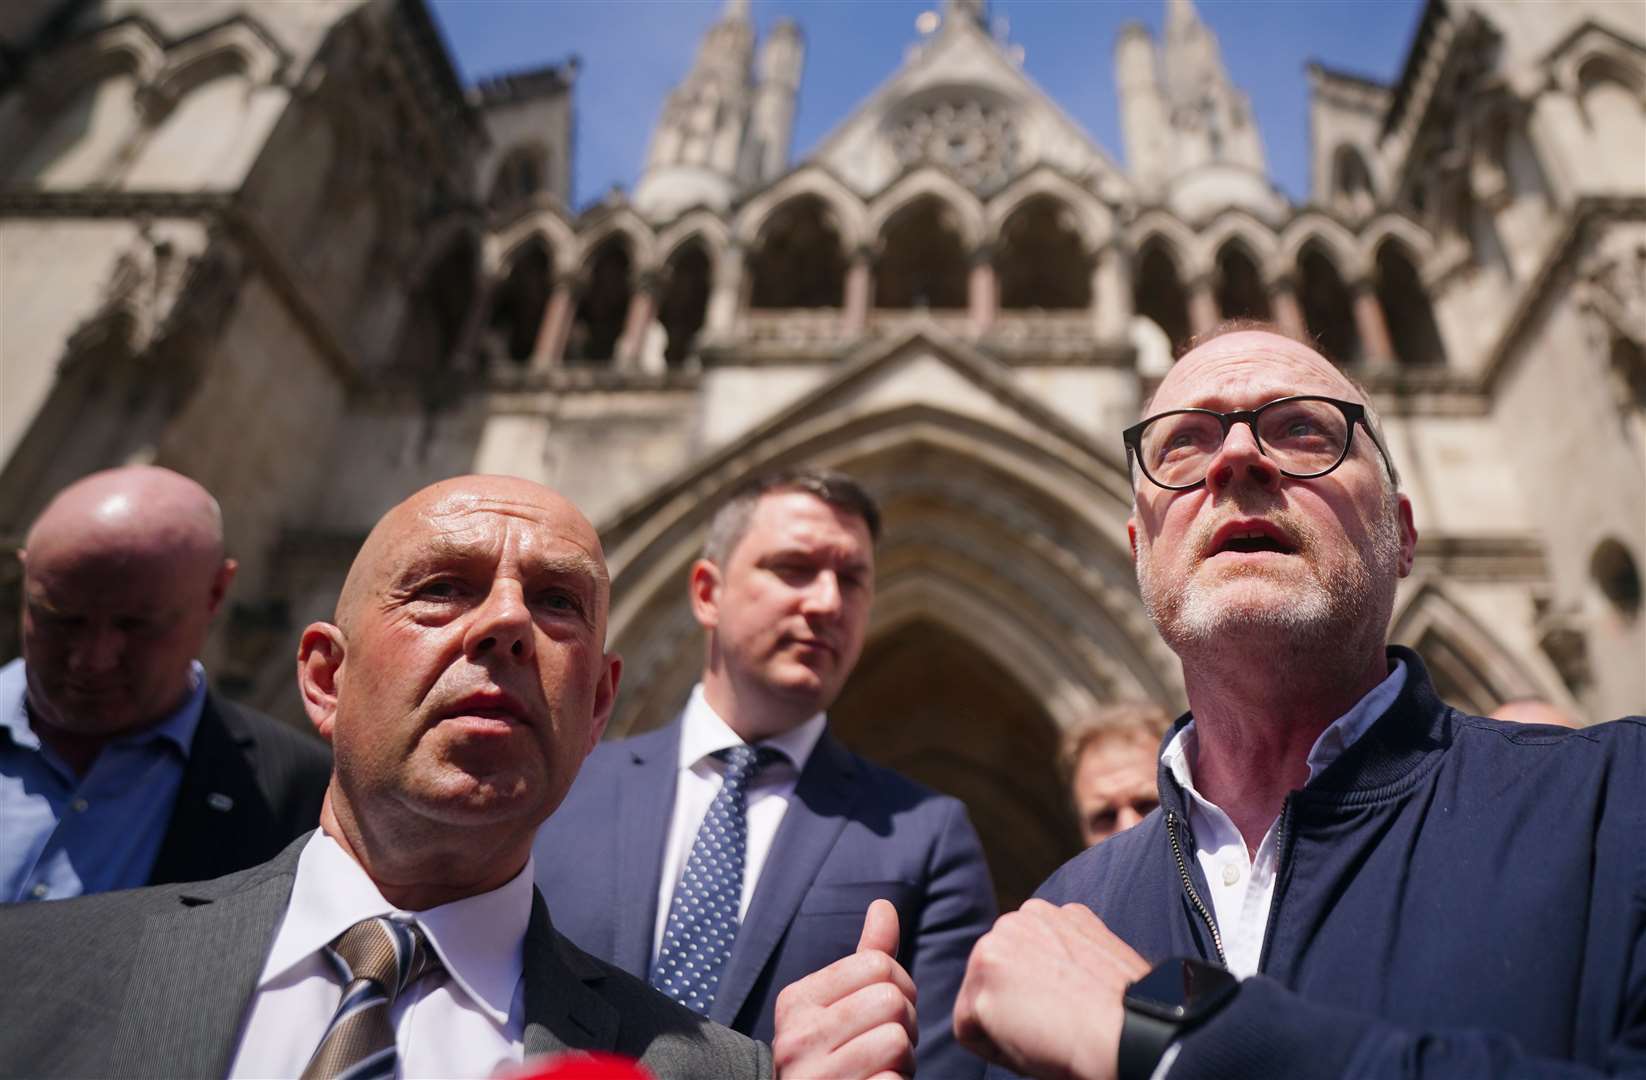 Journalists Barry McCaffrey (left) and Trevor Birney (right) speaking to media after leaving the Royal Courts of Justice in London following an Investigatory Powers Tribunal hearing (Victoria Jones/PA)